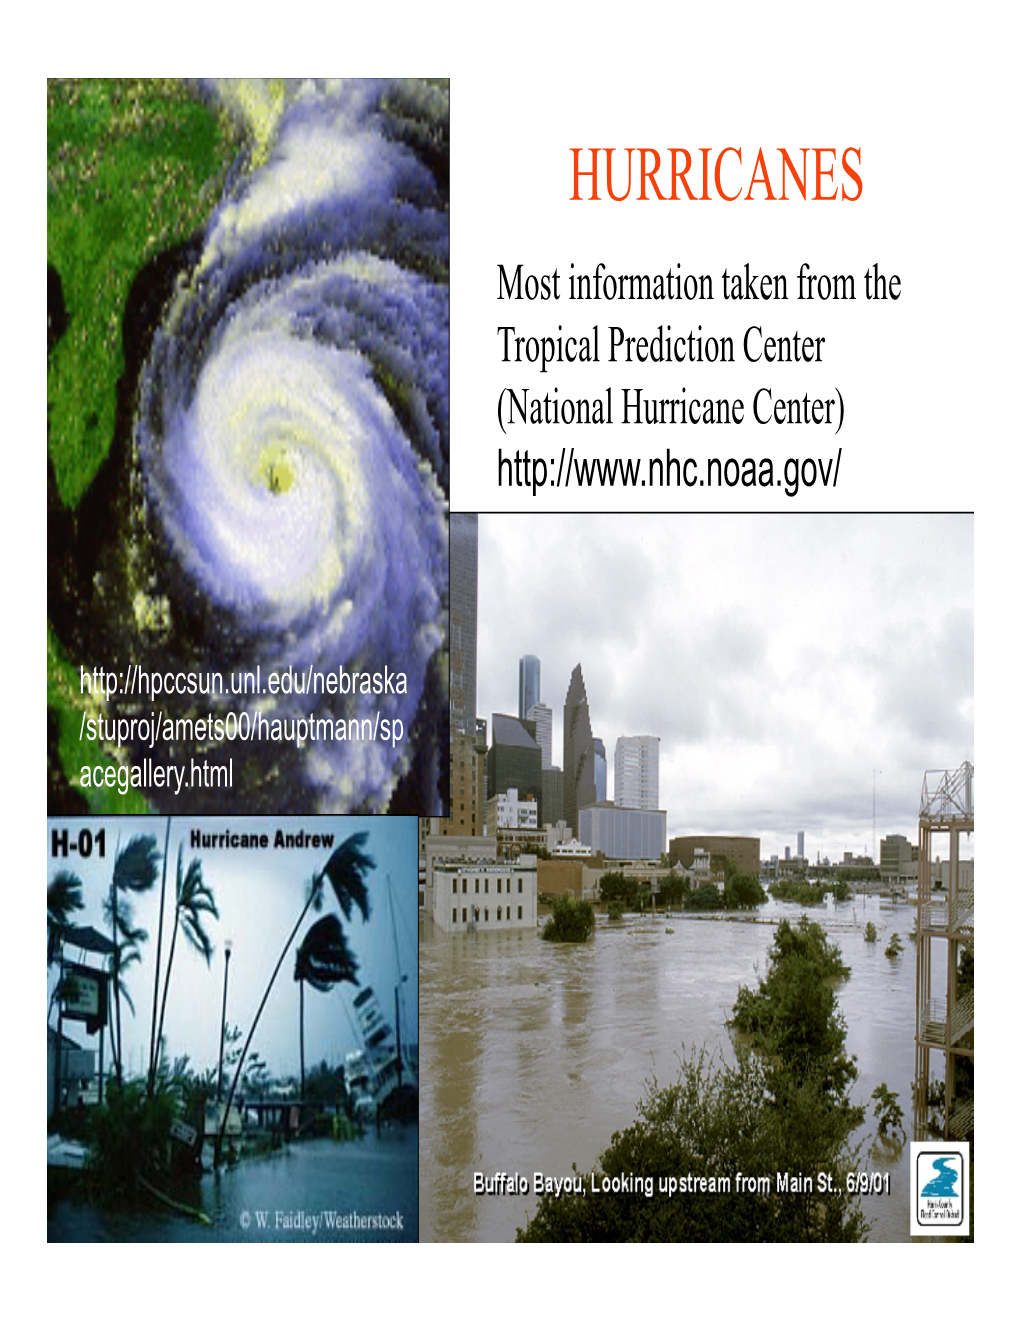 HURRICANES Most Information Taken from the Tropical Prediction Center (National Hurricane Center)